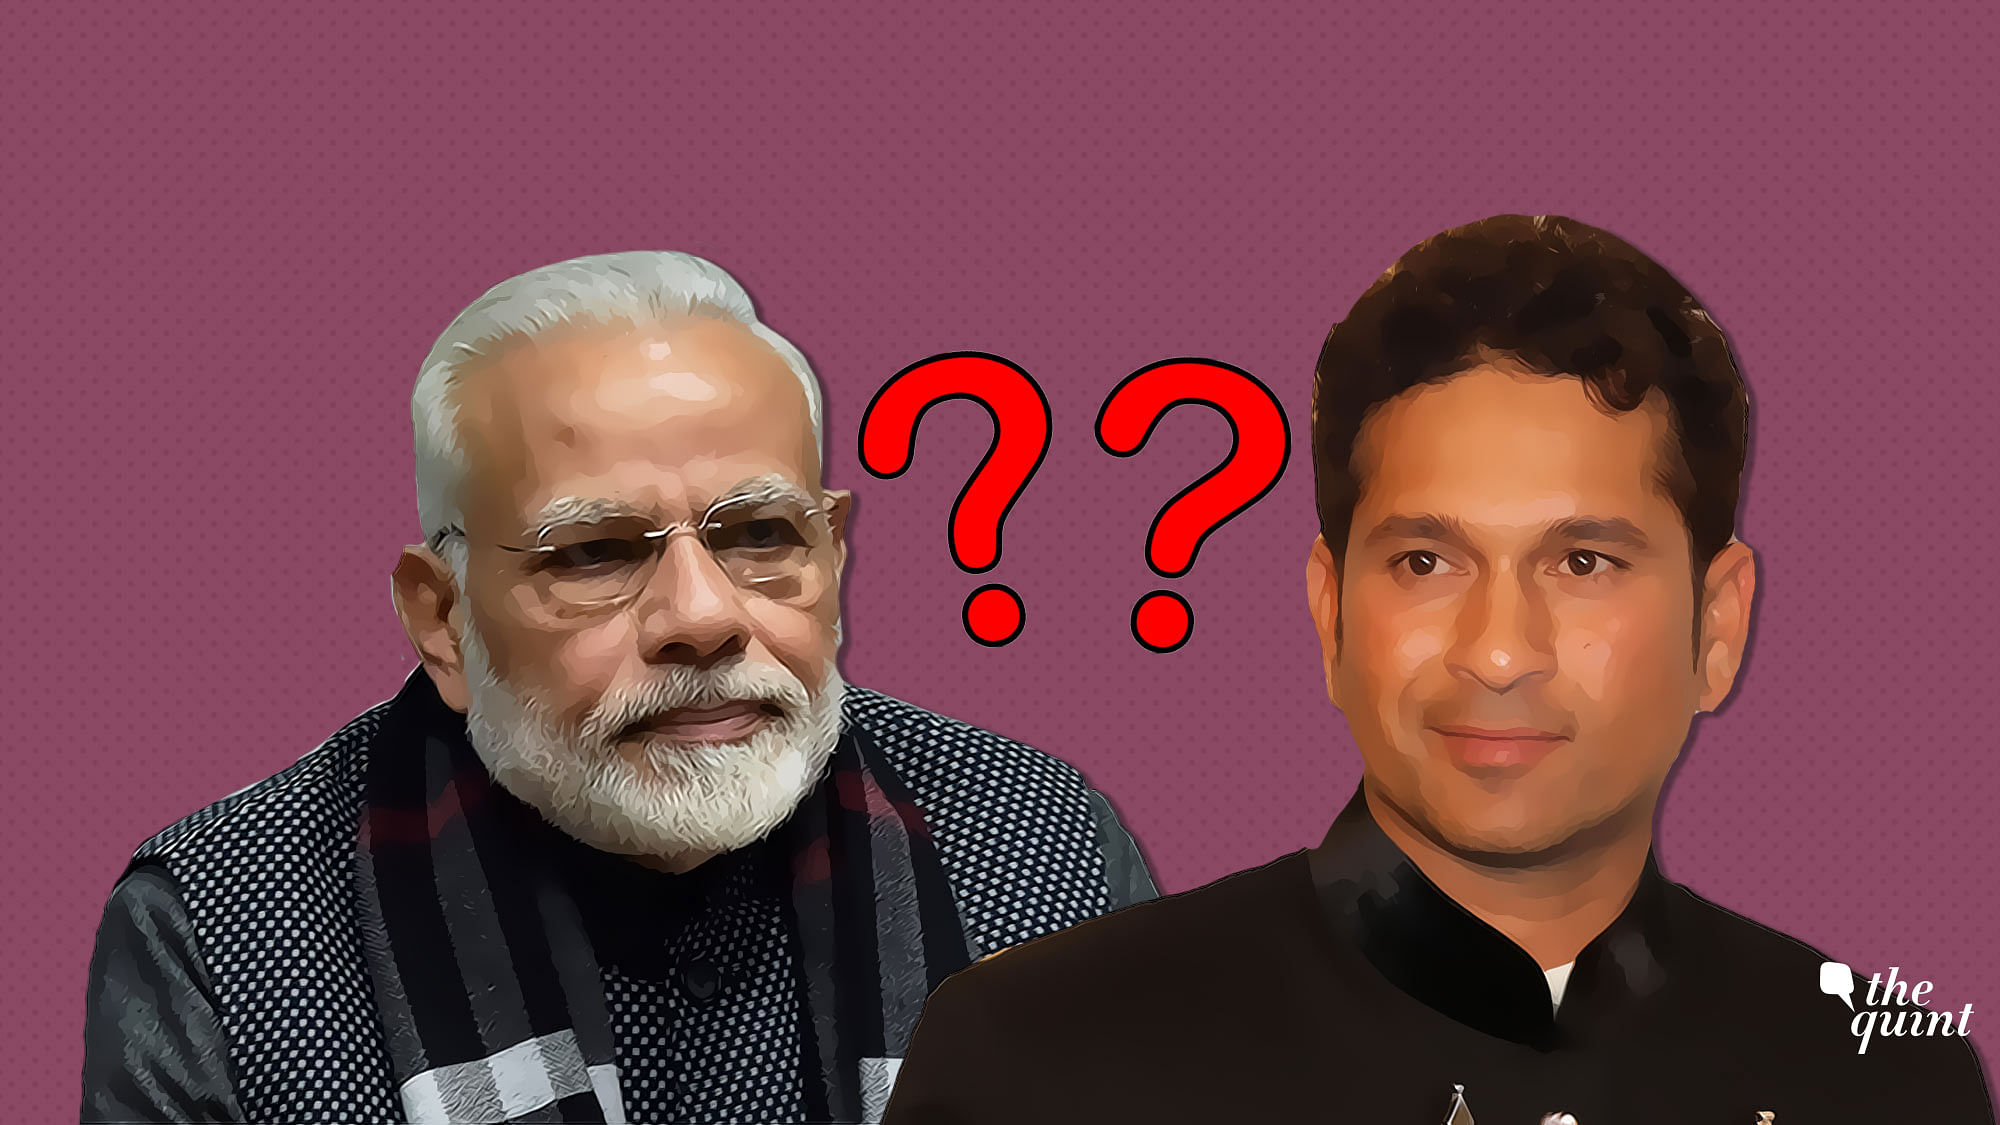 The PMO refused to answer RTI queries about Sachin’s reported donation of his salary and allowances to the PMNRF.